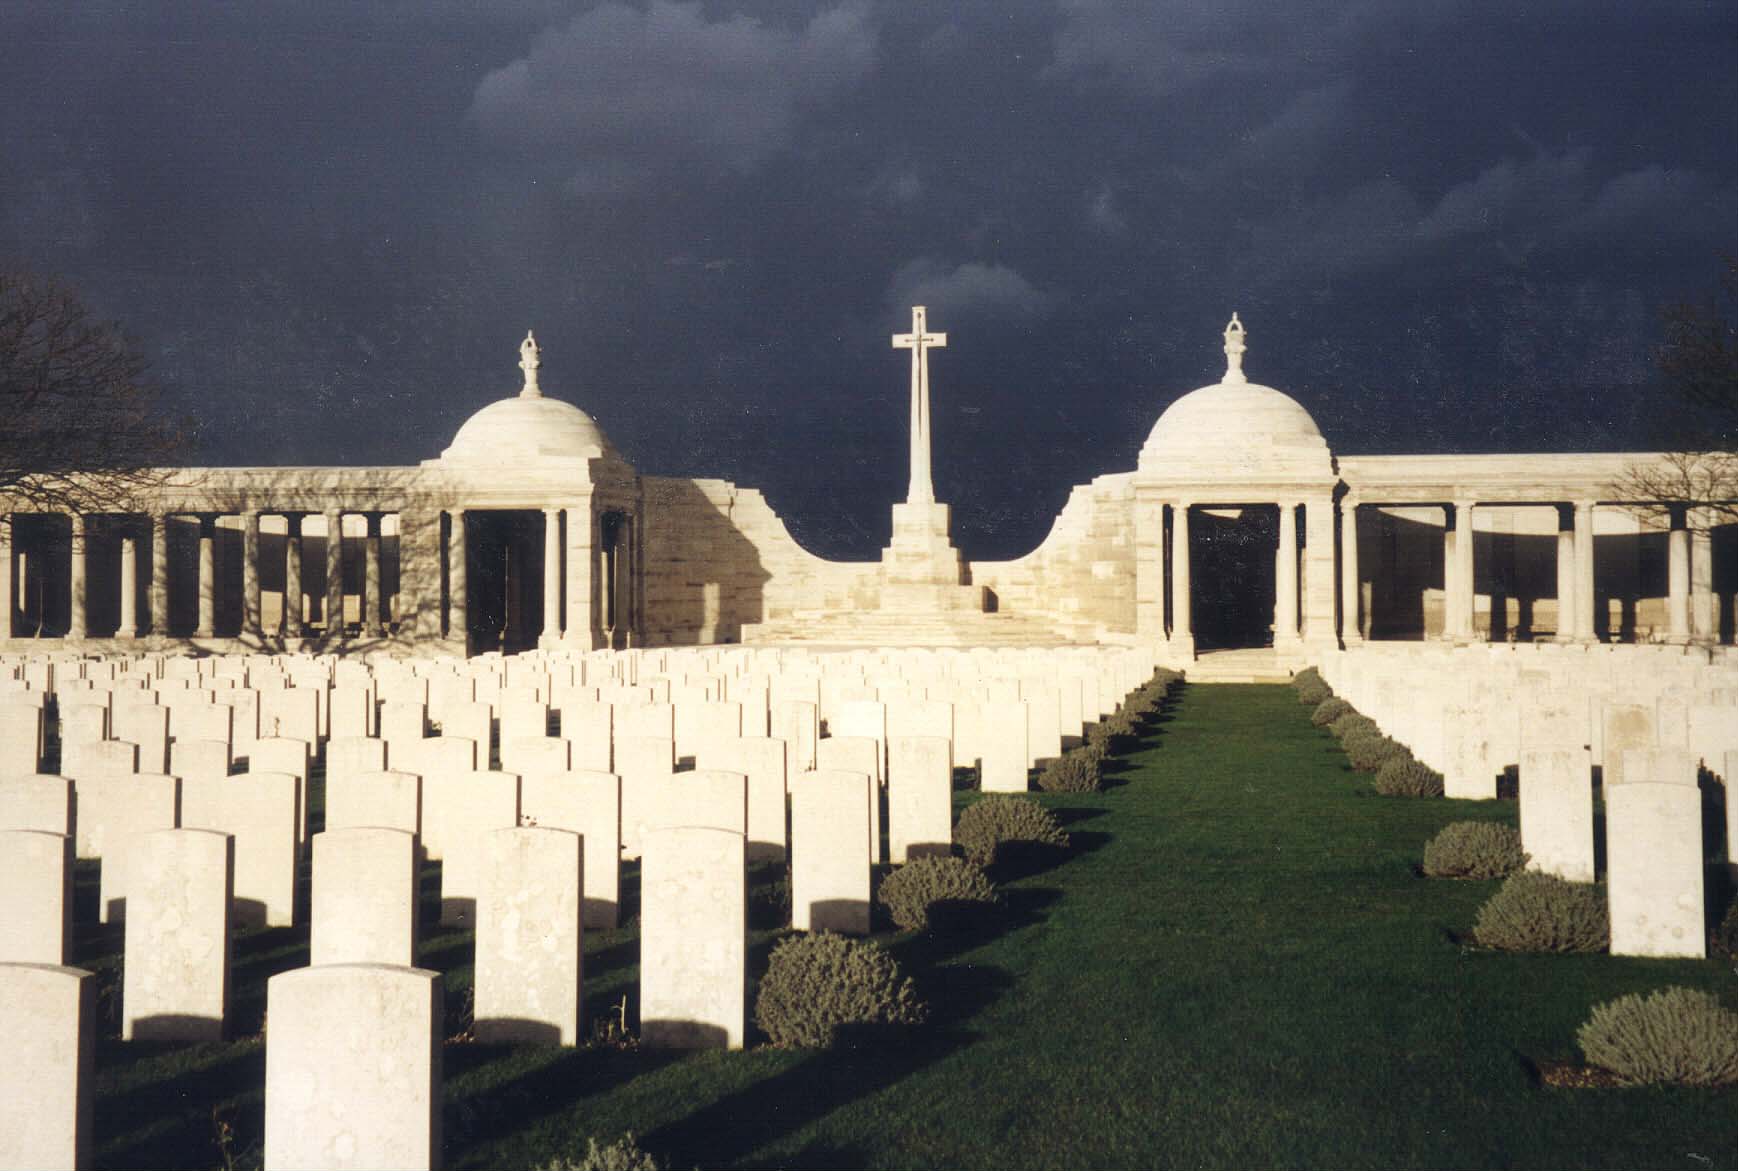 The Loos Memorial with rows of gravestones in front